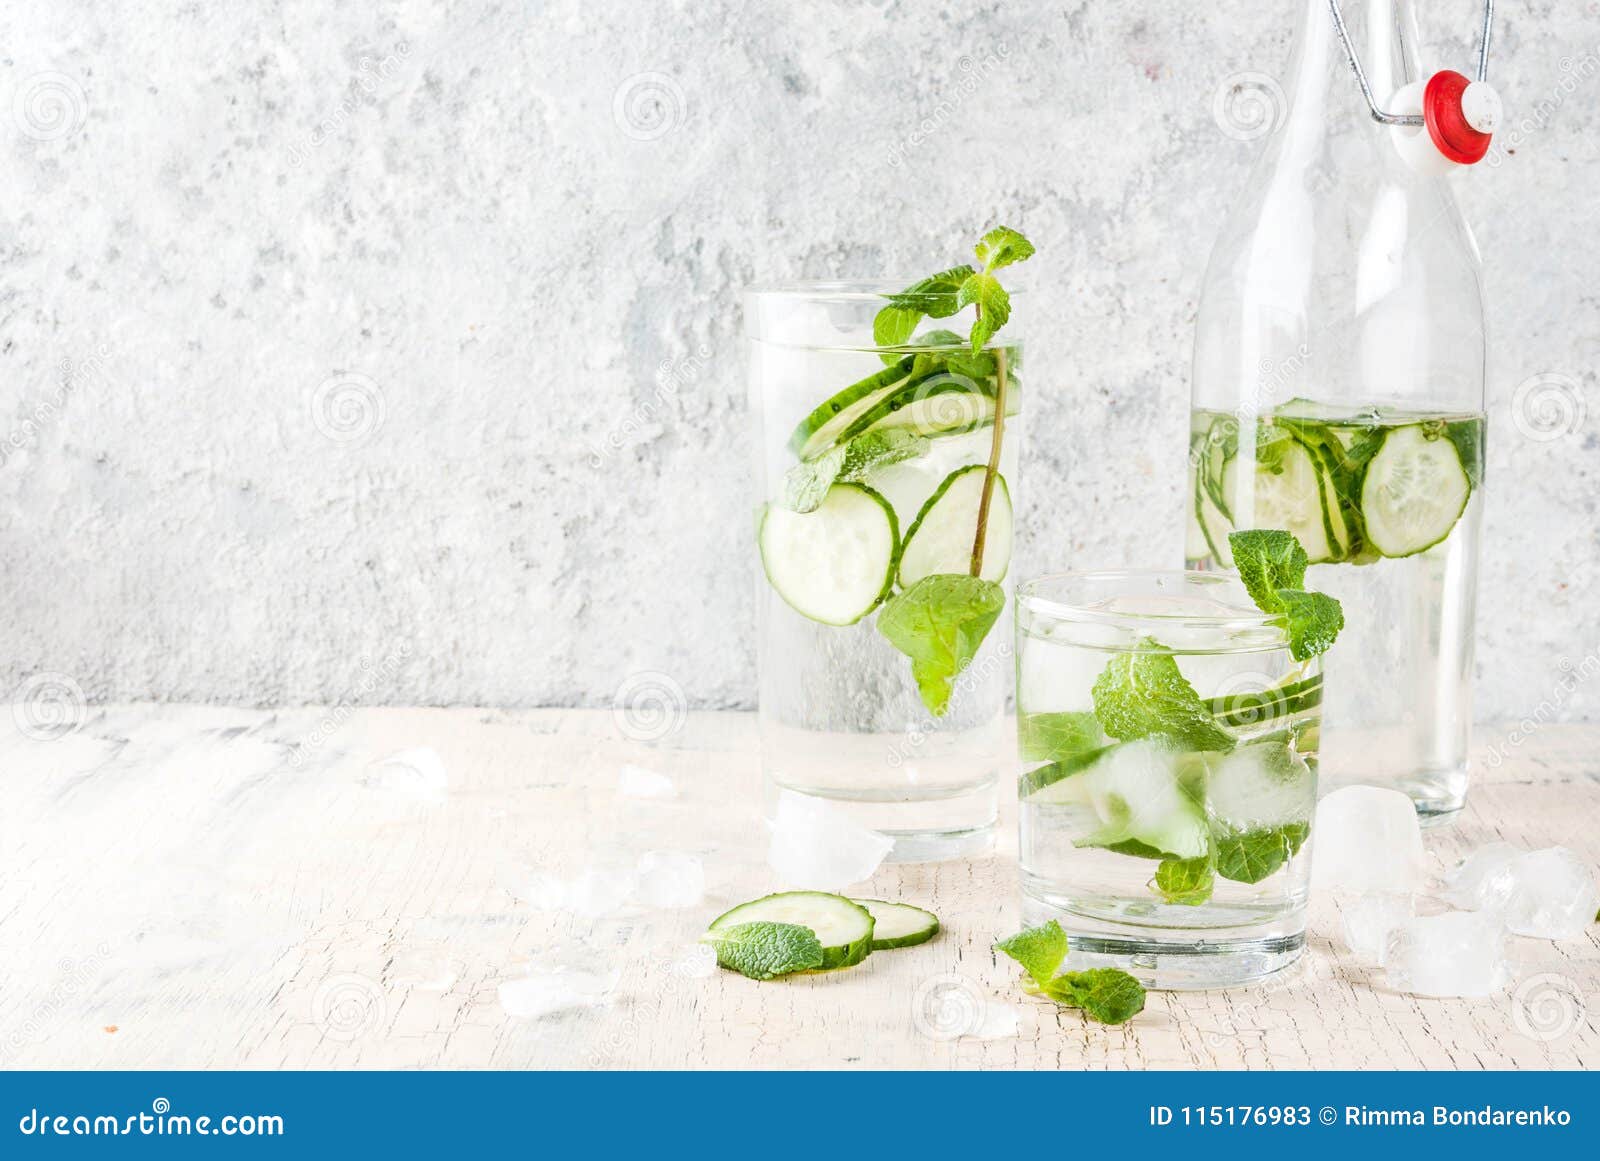 Mint and Cucumber Infused Water Stock Image - Image of copy, cucumber